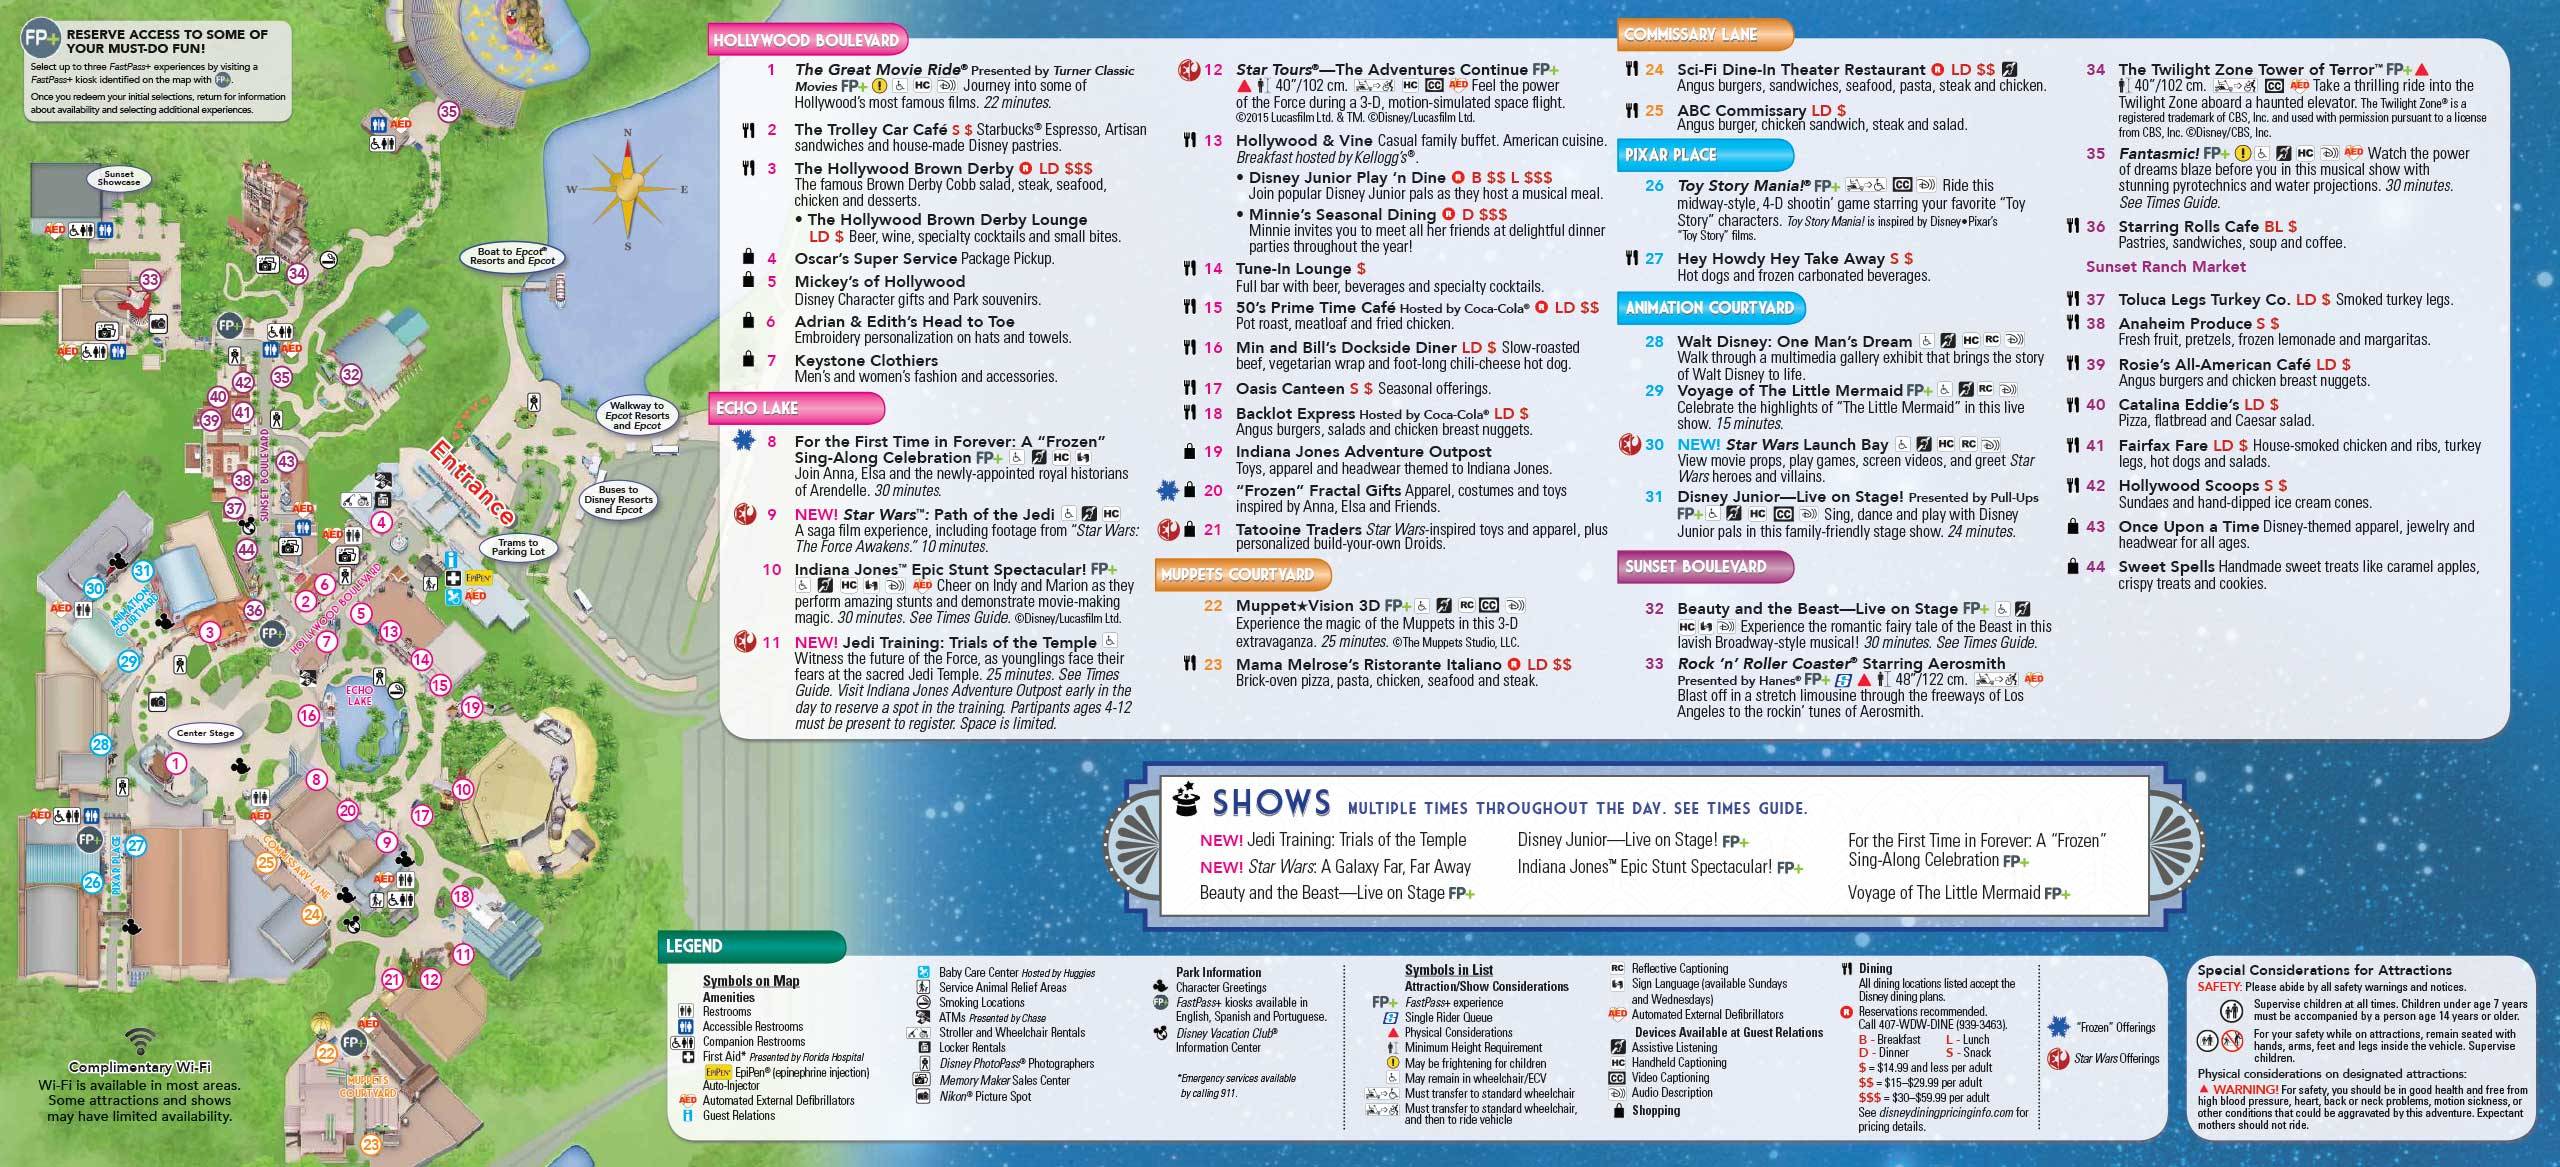 April 2016 Disney's Hollywood Studios guide map with backlot area removed